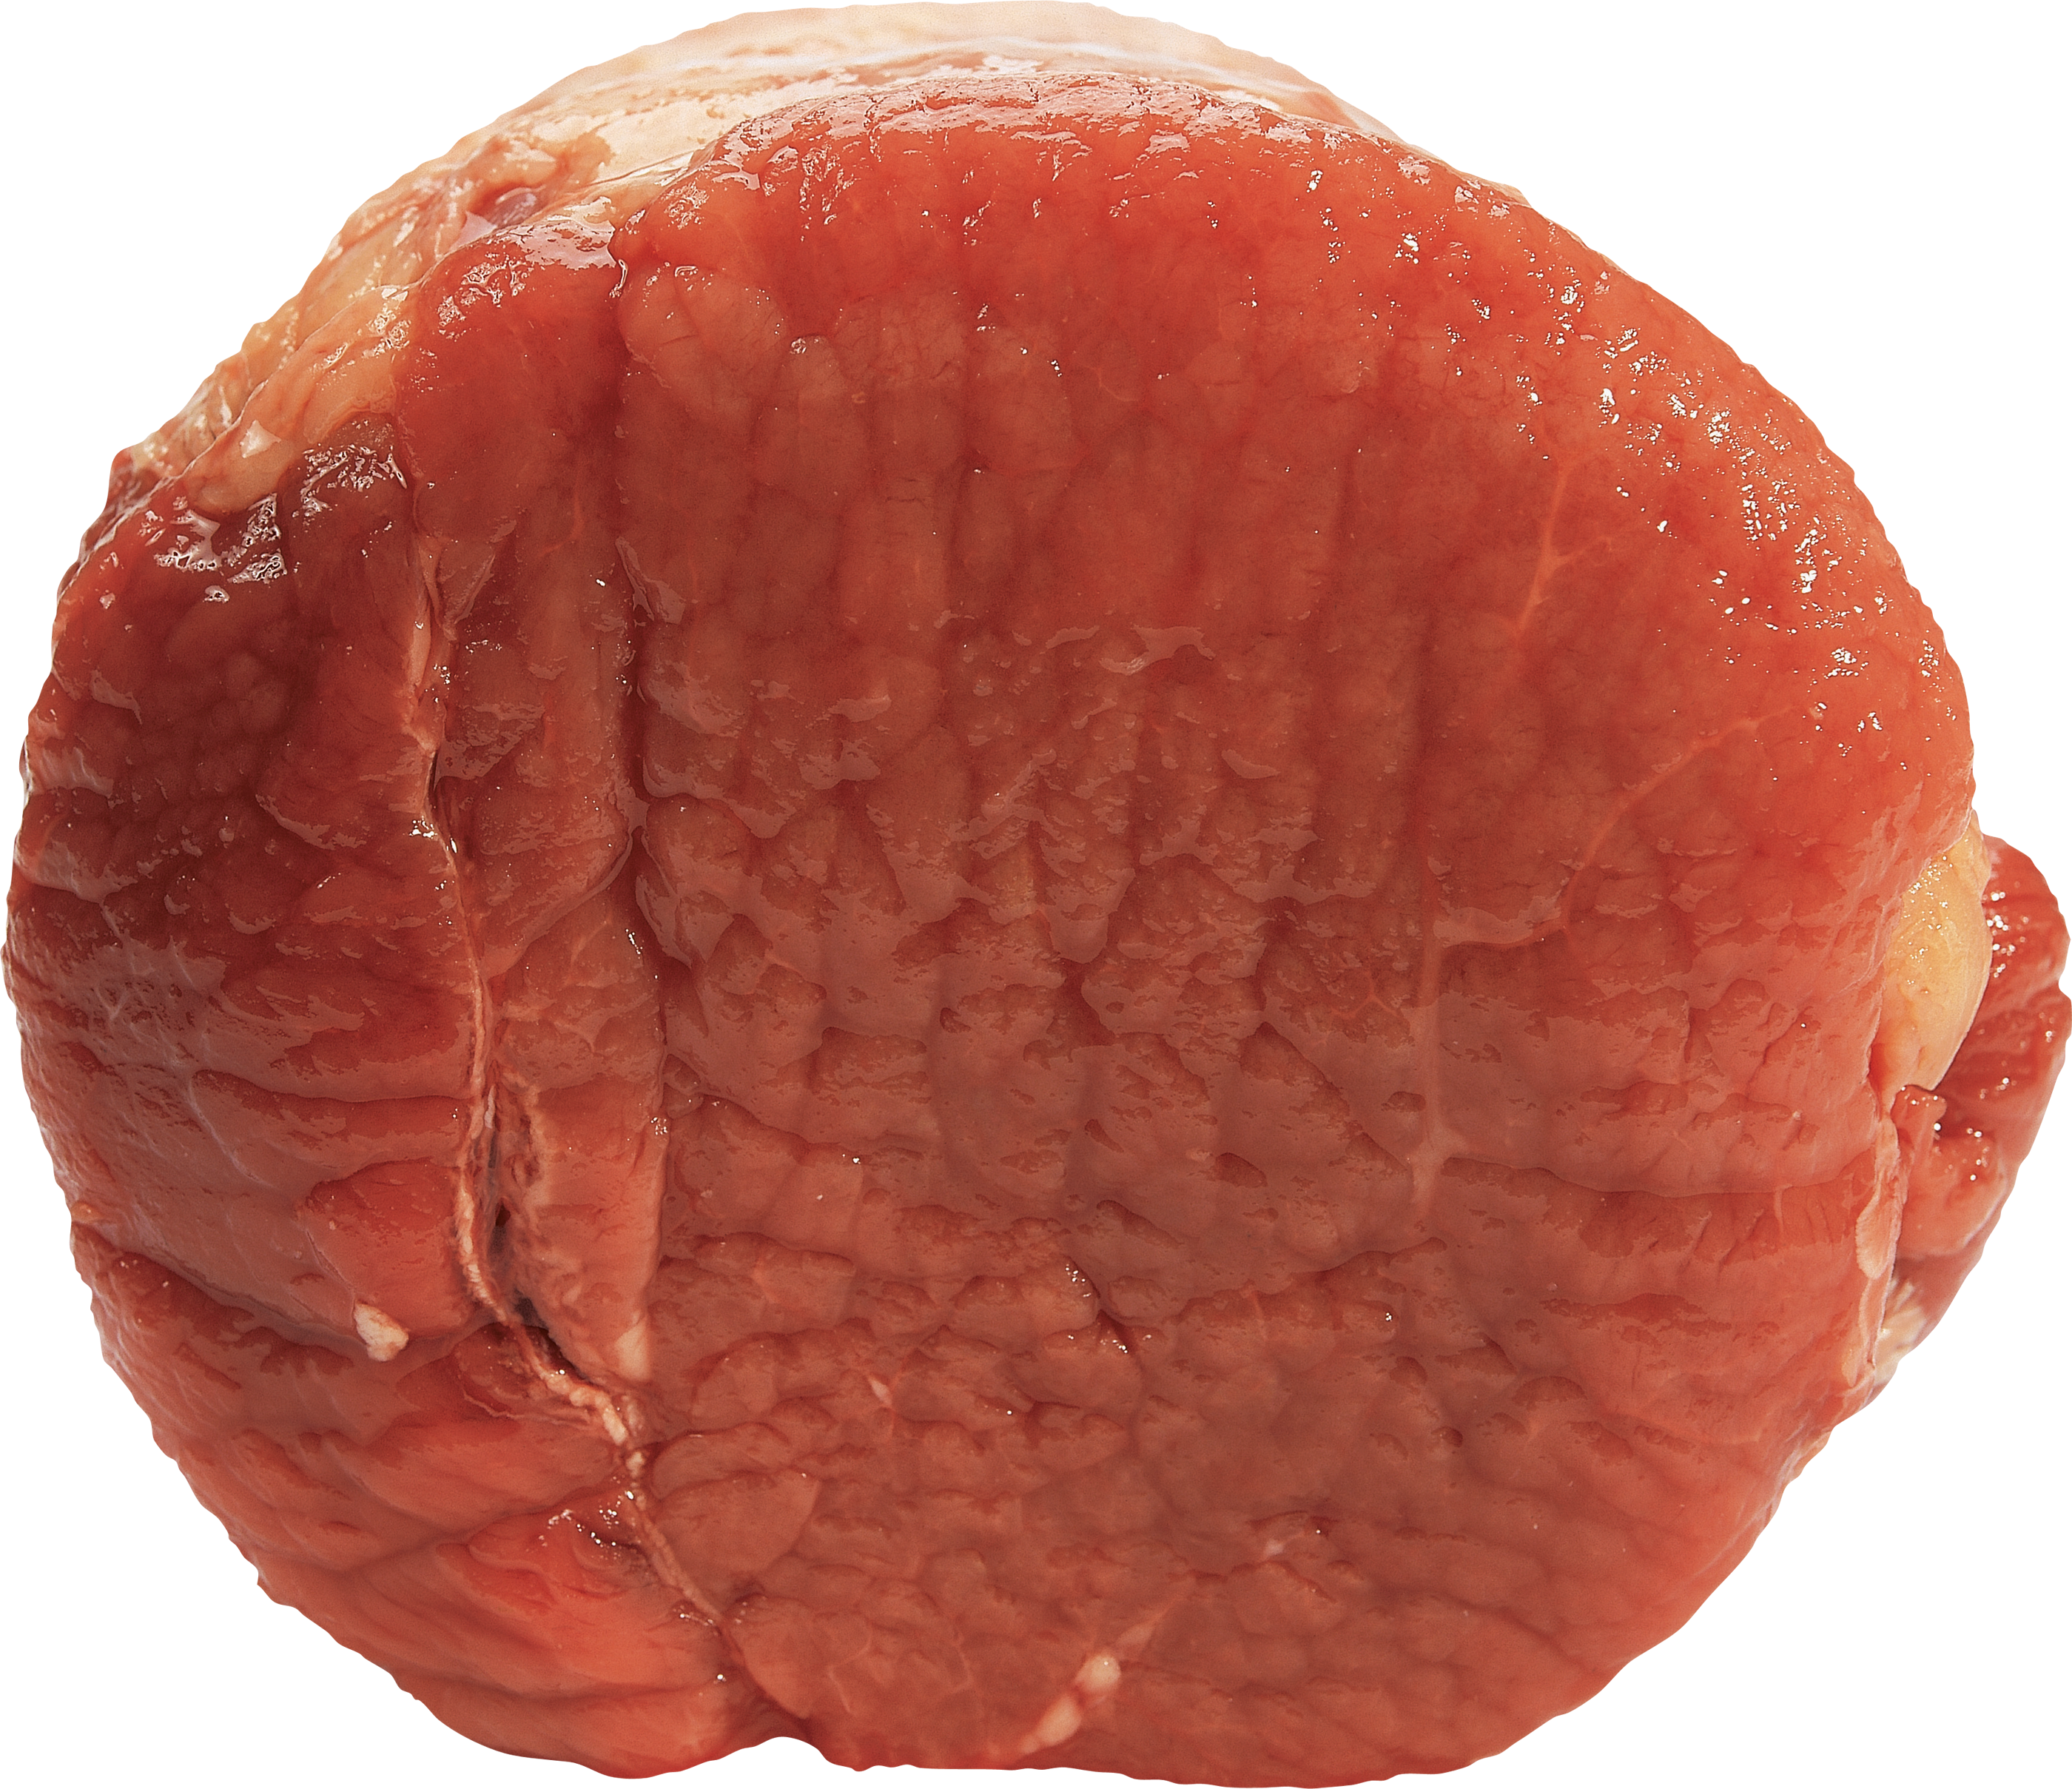 uncooked meat PNG picture